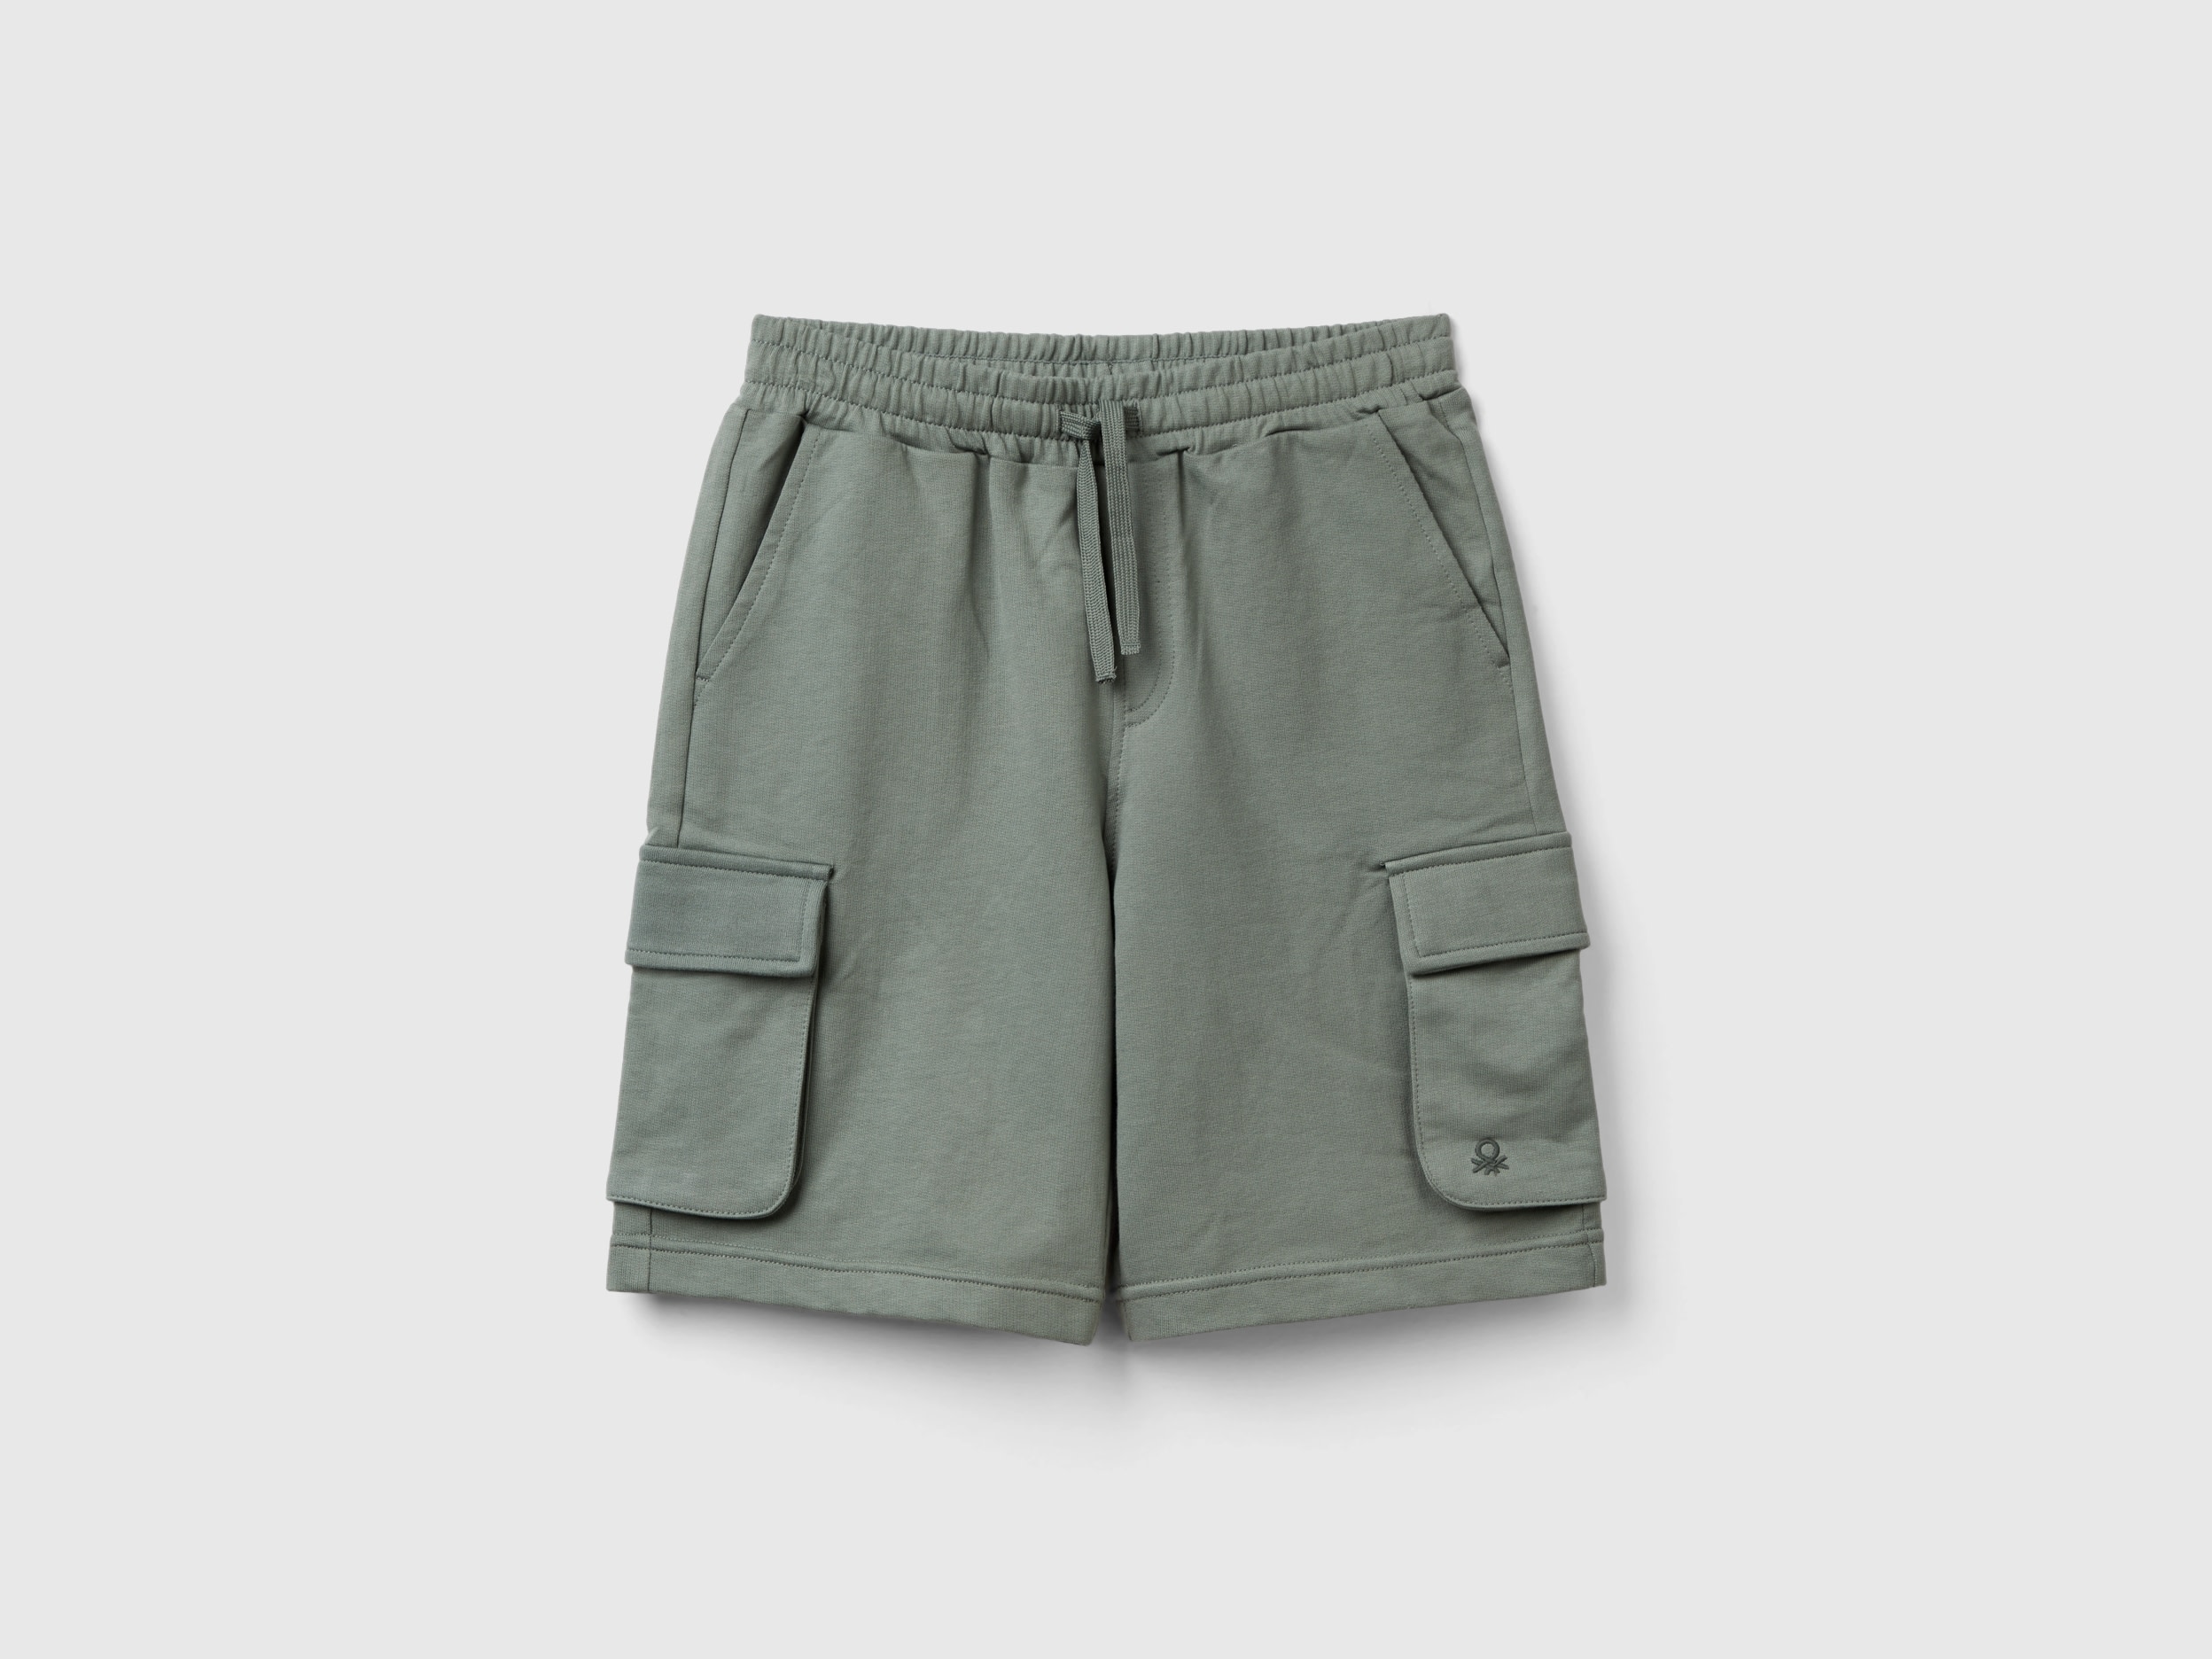 Image of Benetton, Cargo Shorts In Light Sweat Fabric, size S, Military Green, Kids